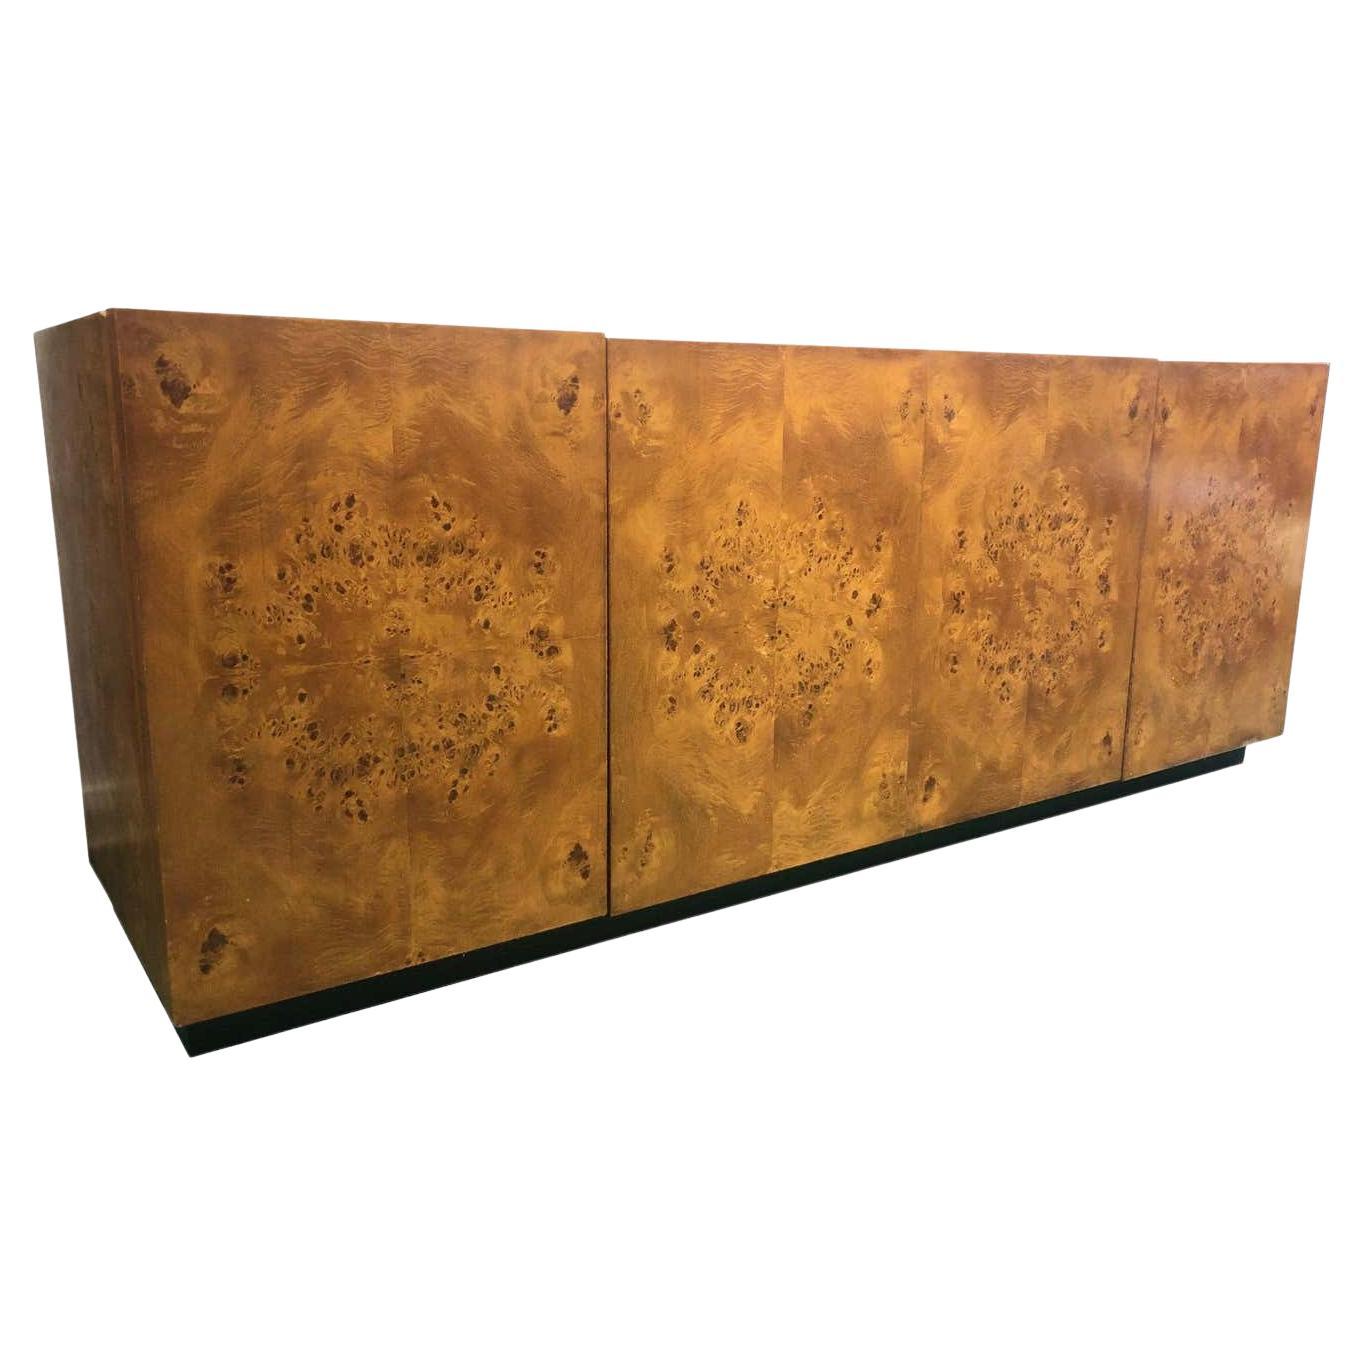 Burl Case Pieces and Storage Cabinets